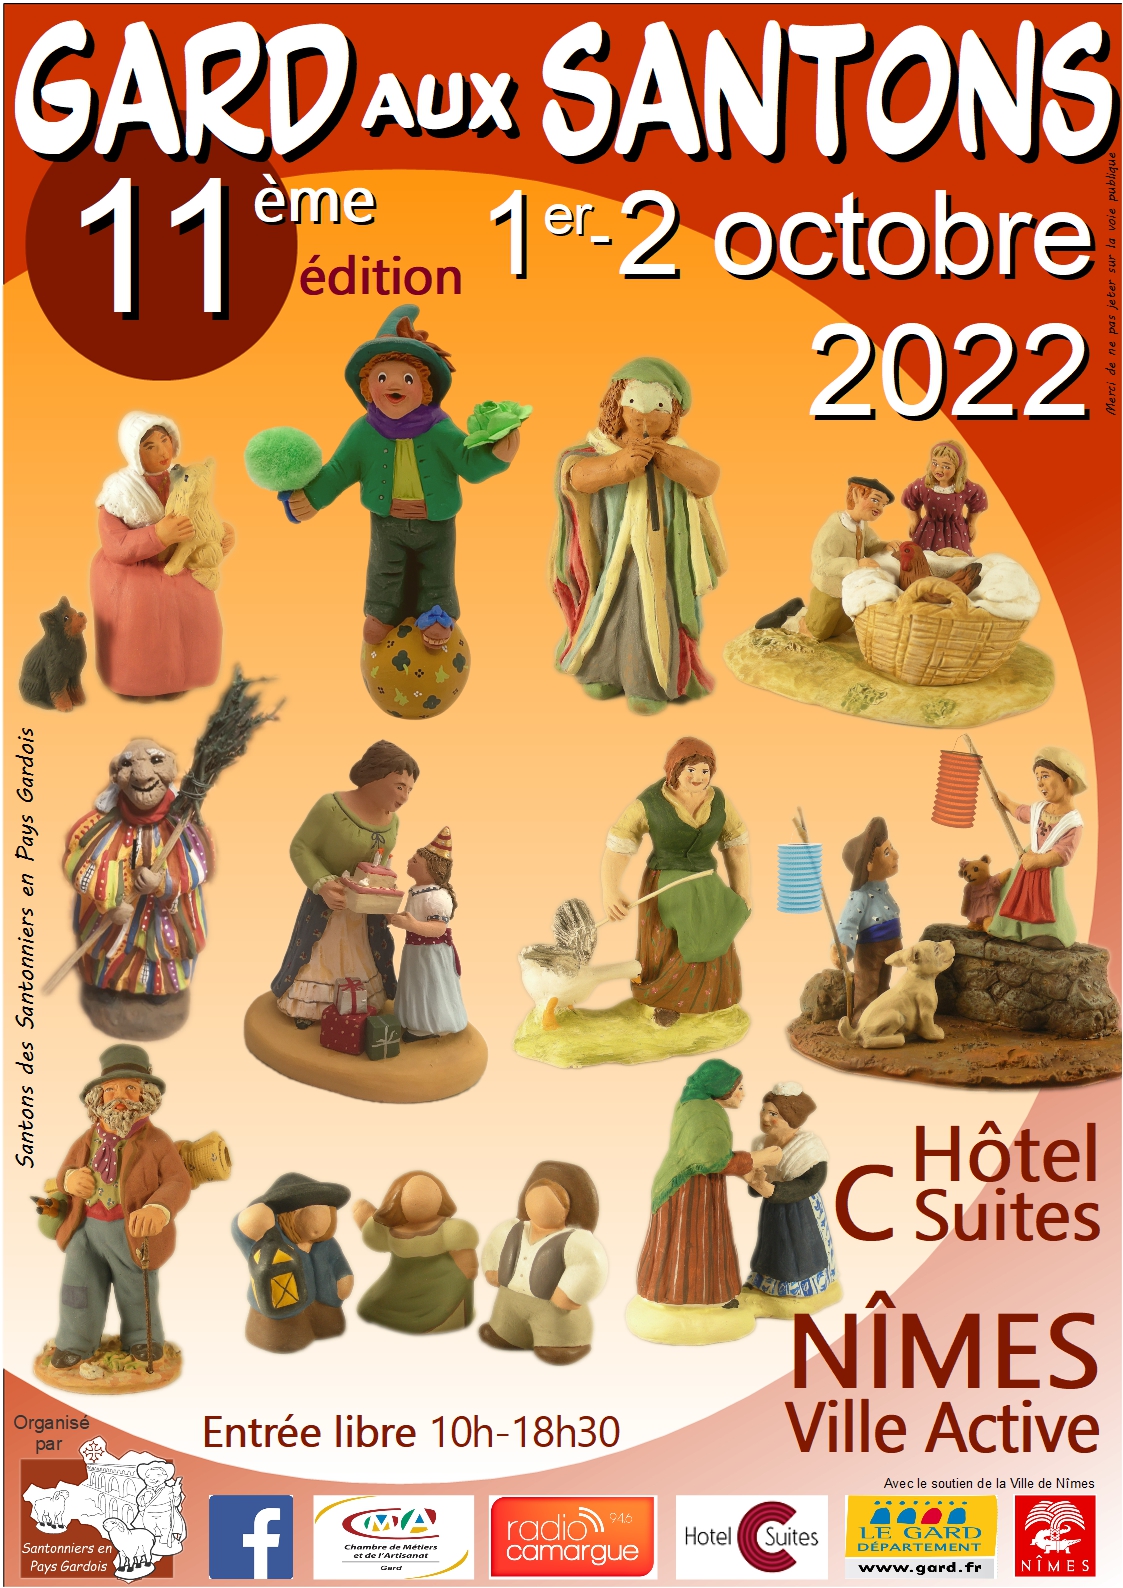 You are currently viewing “Gard aux santons” – Nimes – 2022